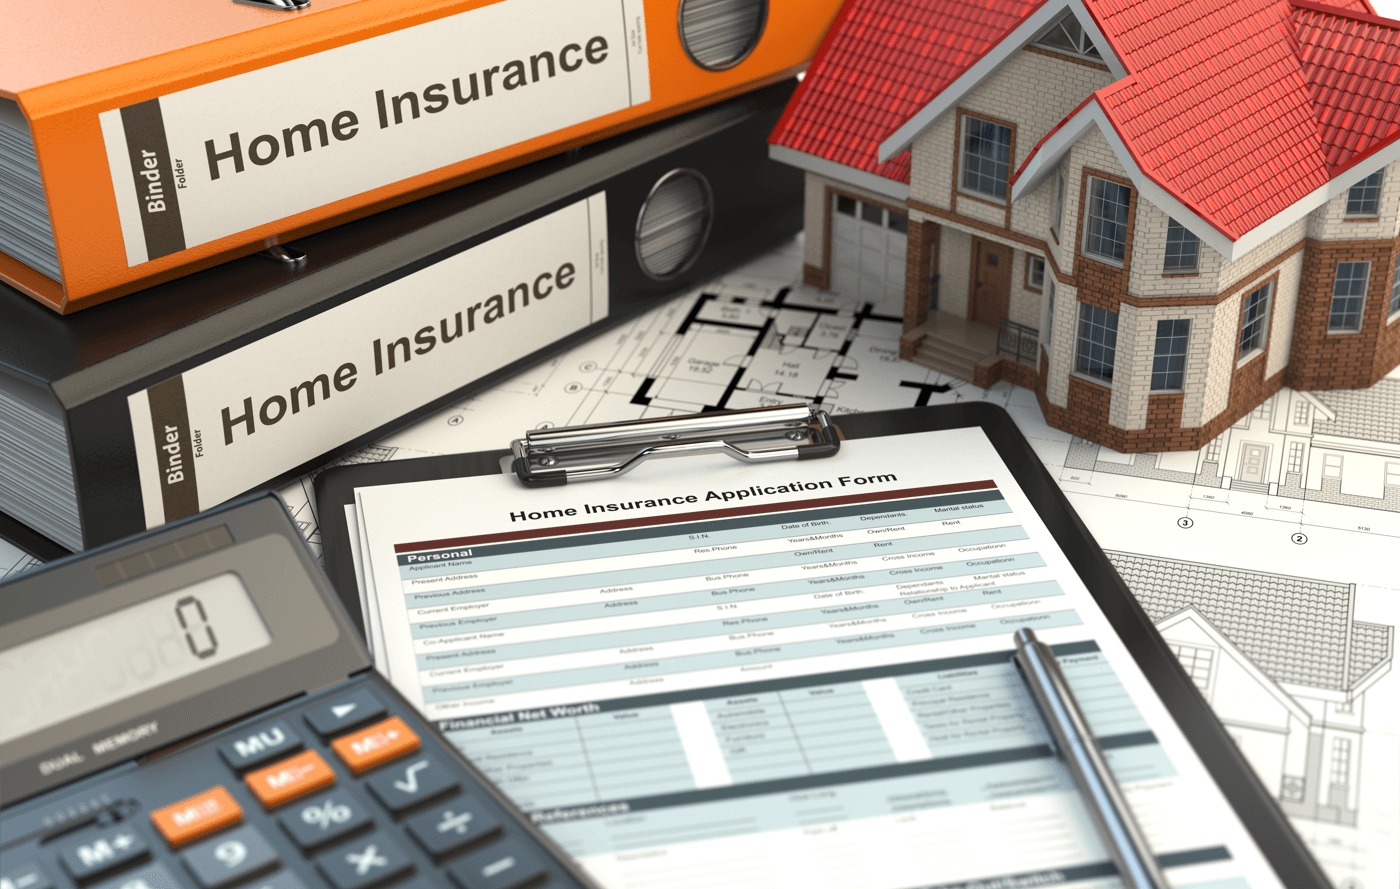 7 Details About Home Insurance You Should Know Application Image